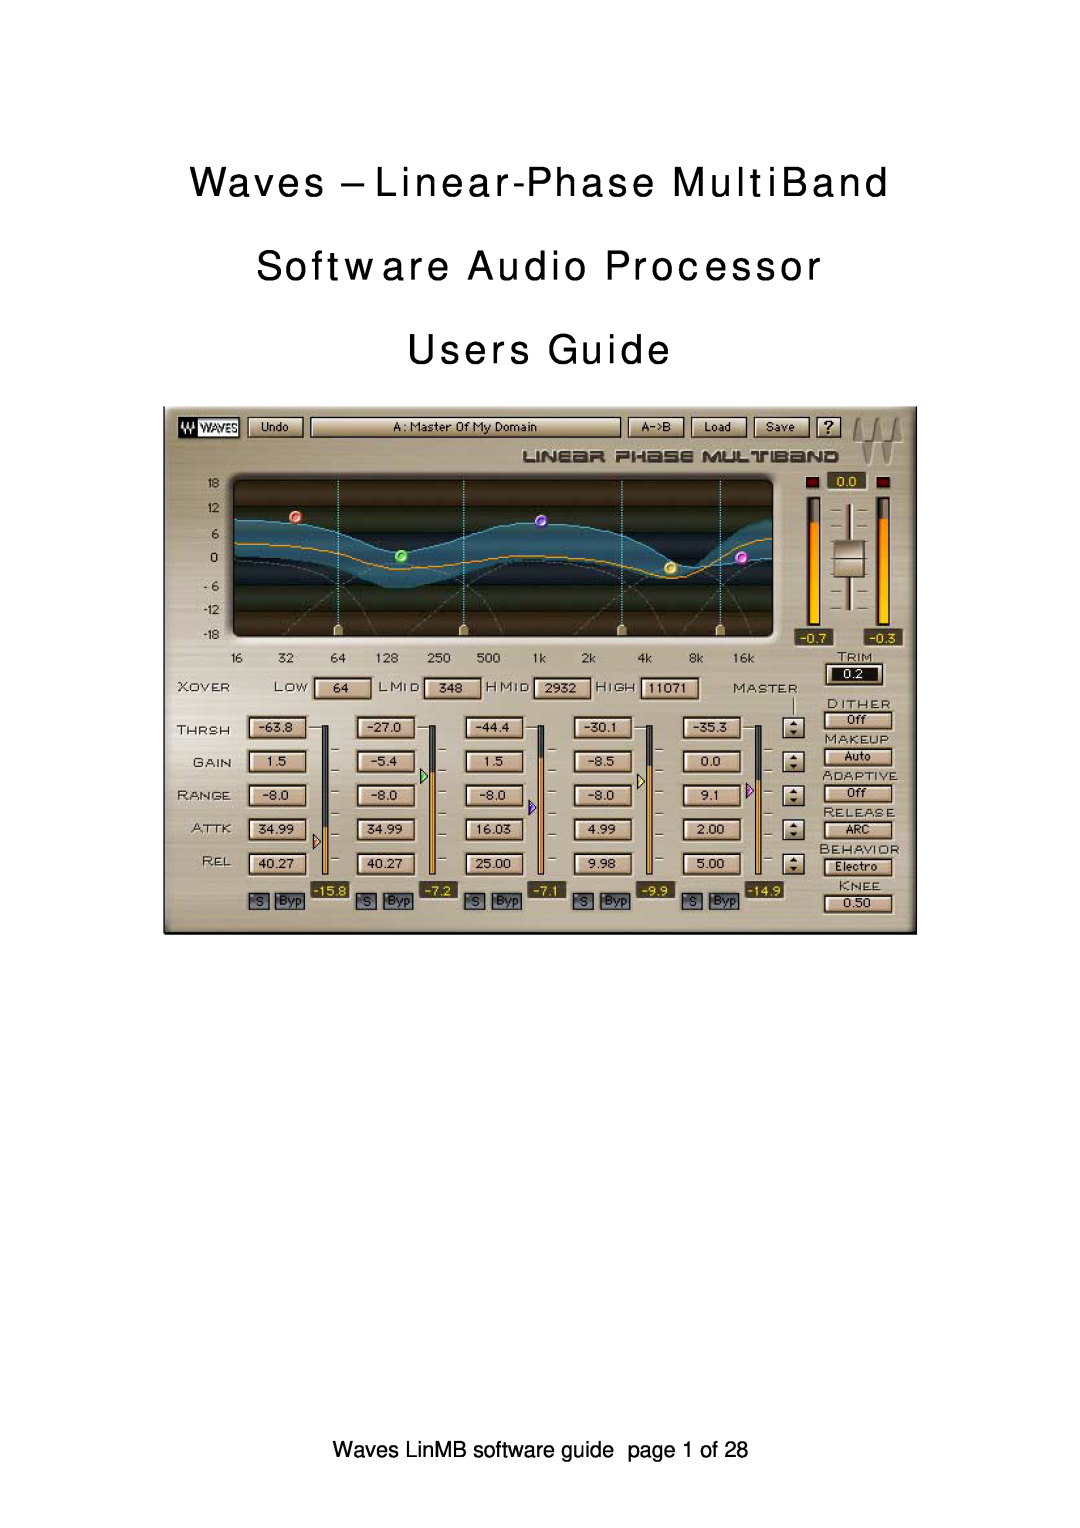 Waves Linear-Phase MultiBand Software Audio Processor manual Waves - Linear-PhaseMultiBand, Waves LinMB software guide 